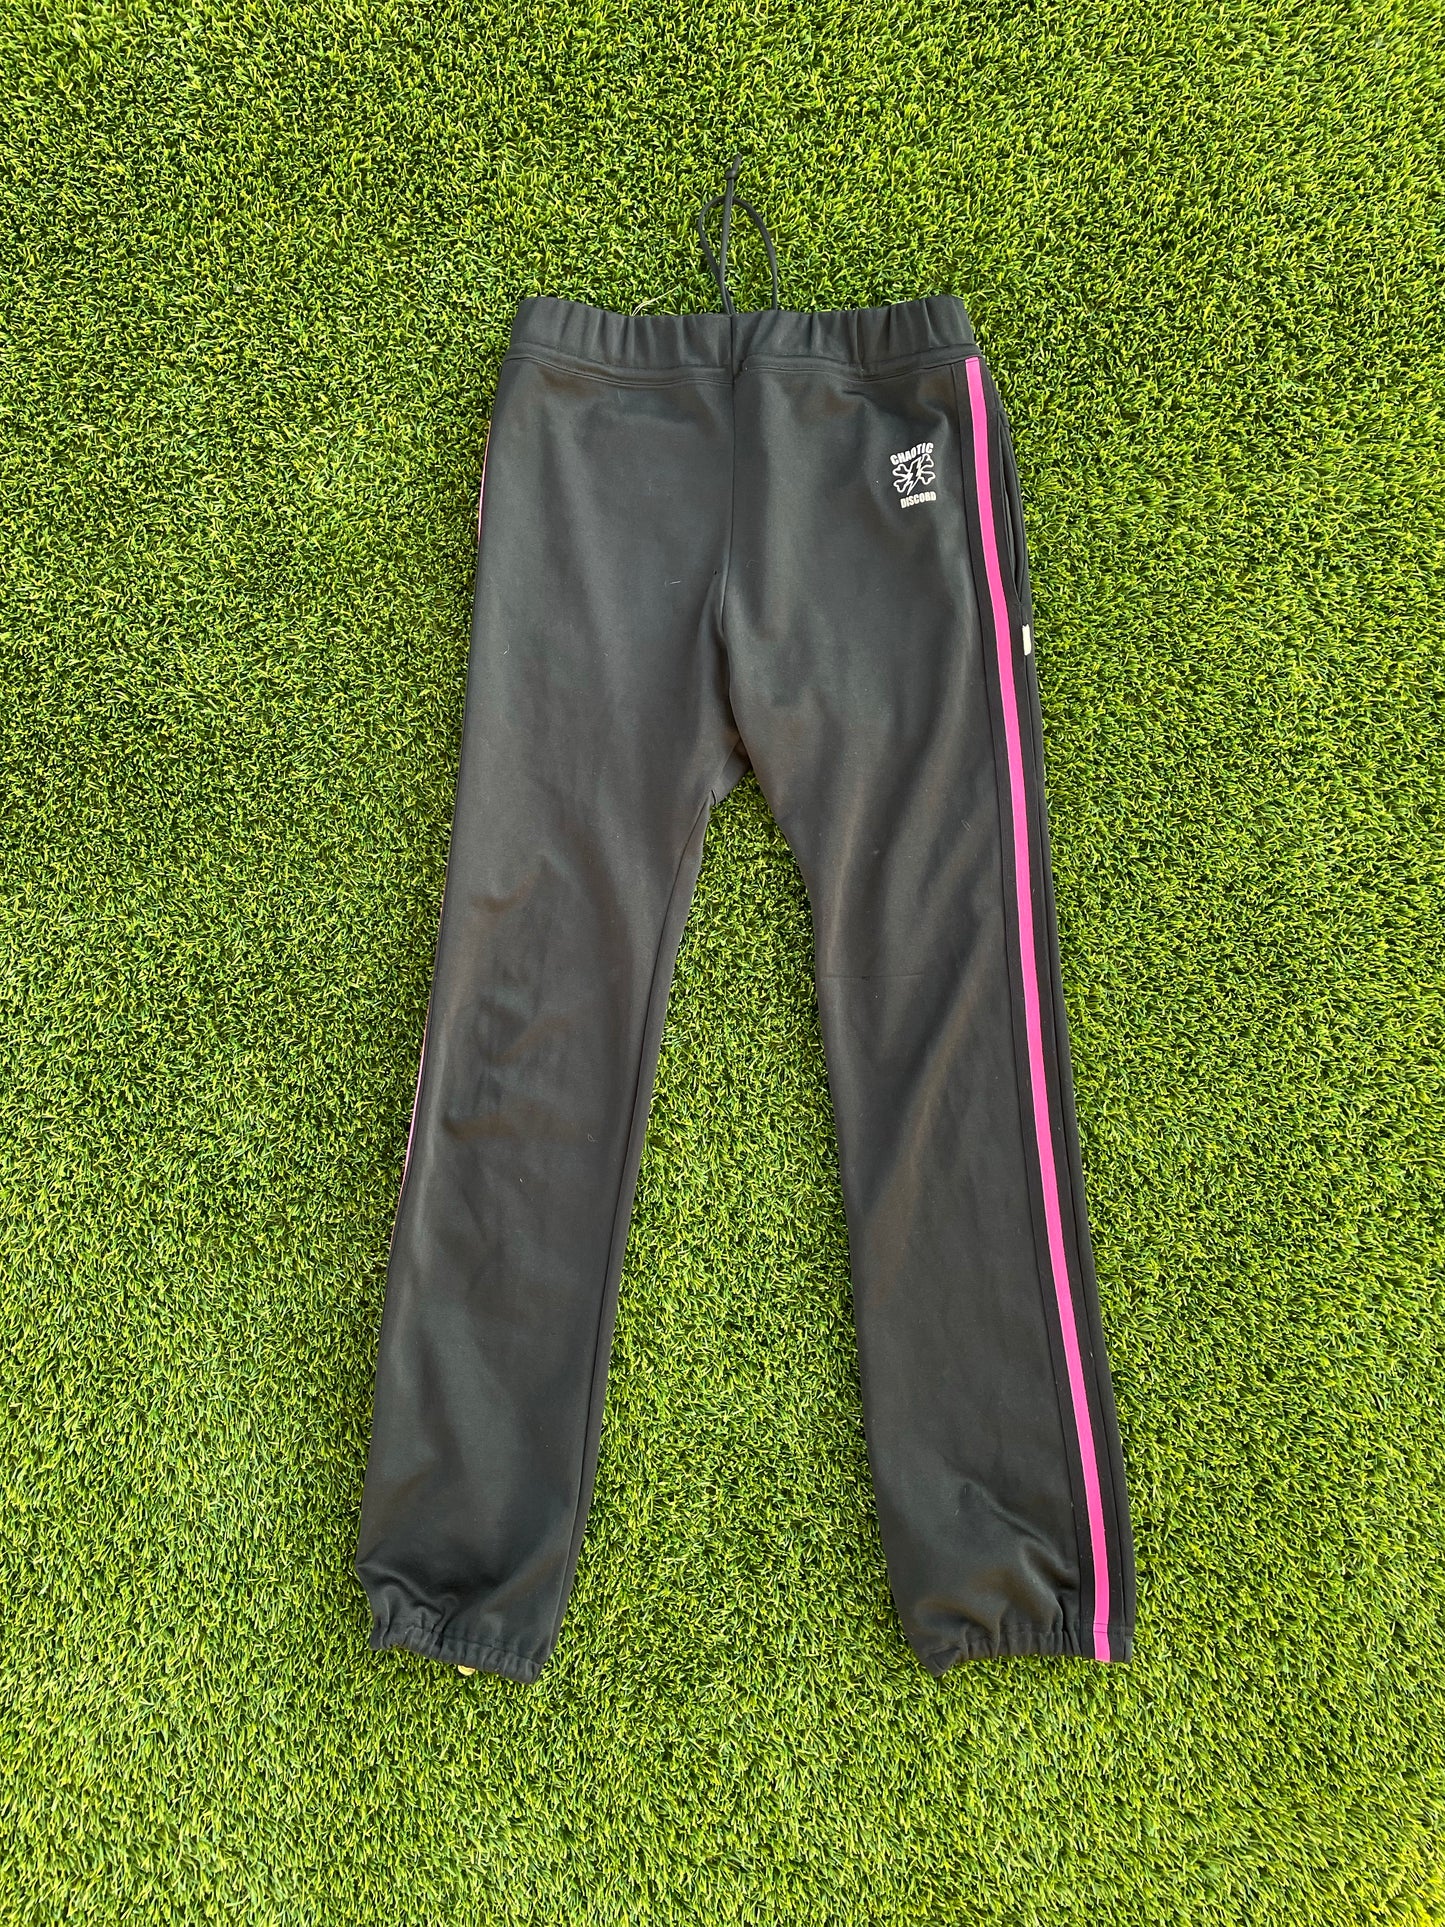 SS01 Undercover “Chaotic Disorder” Pink Stripe Sweatpant